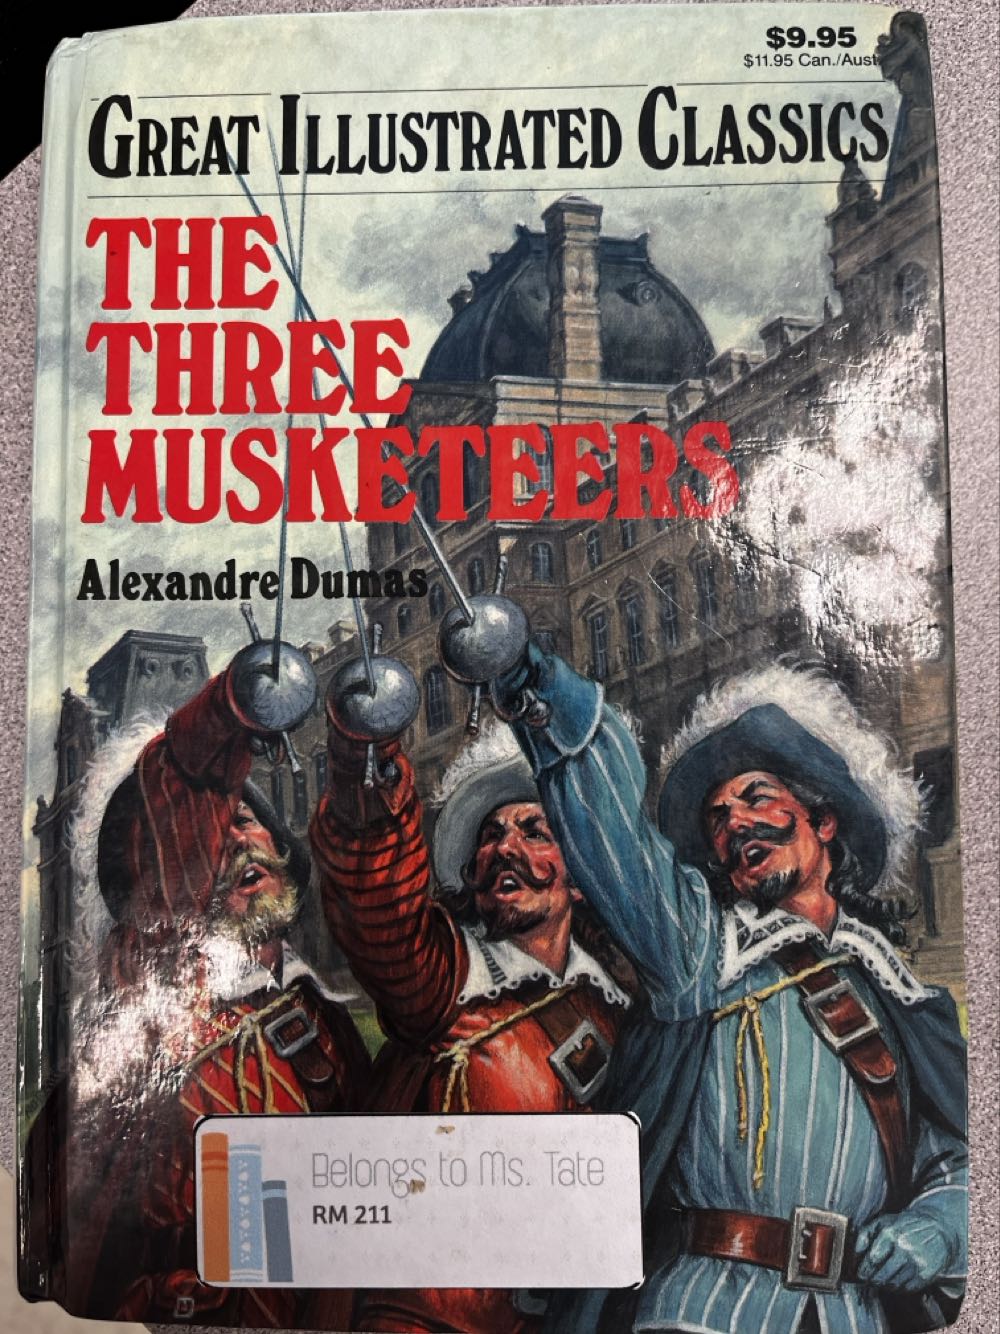 Great Illustrated Classics - The Three Musketeers - dumas, Alexander book collectible - Main Image 1